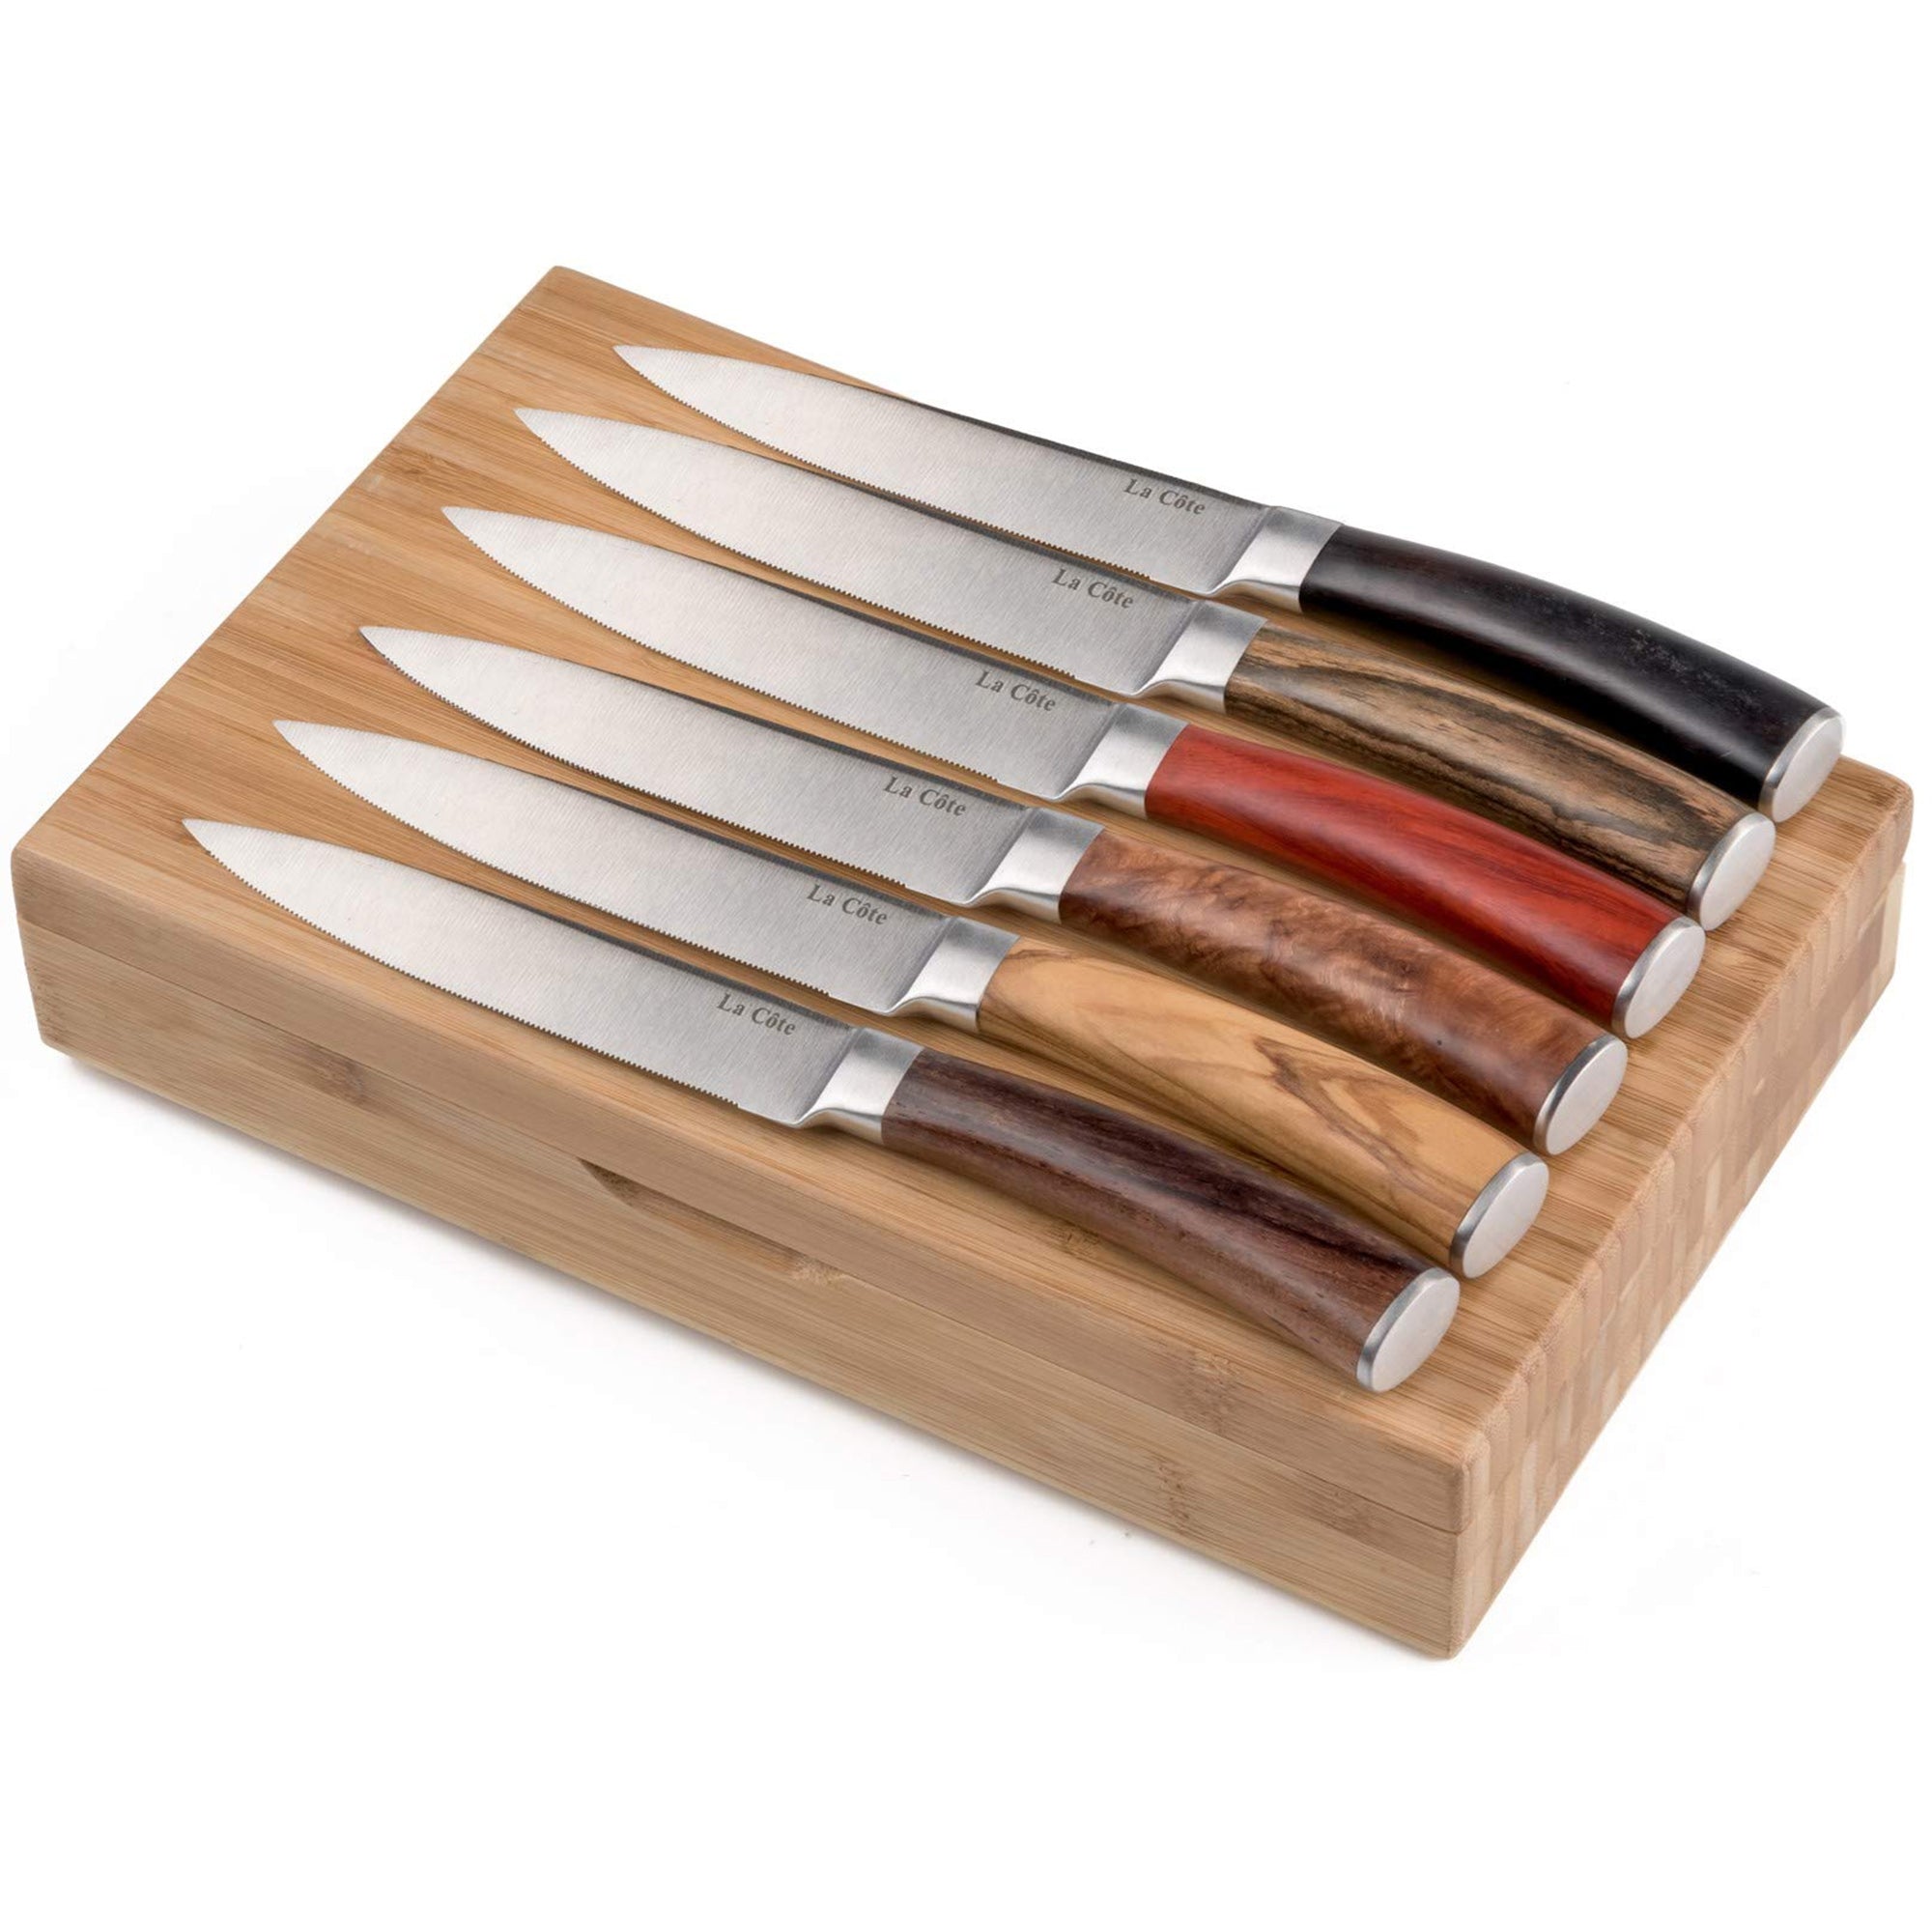 6 Piece Steak Knives Set Japanese Stainless Steel (With Gift Box)